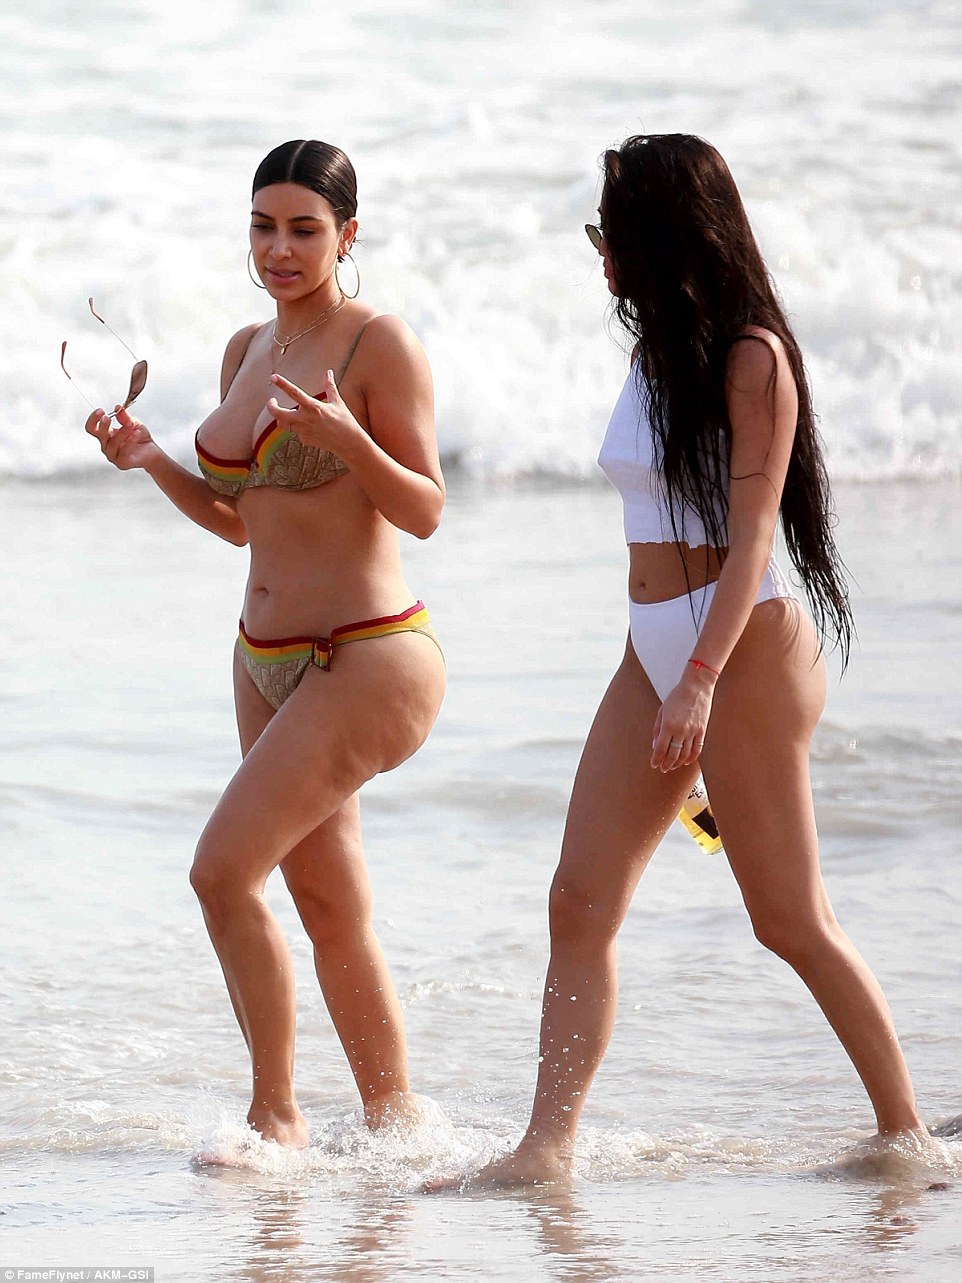 Omg! People Are Talking About These Un3dited B!kin! Photos of Kim Kardashian (Photos)